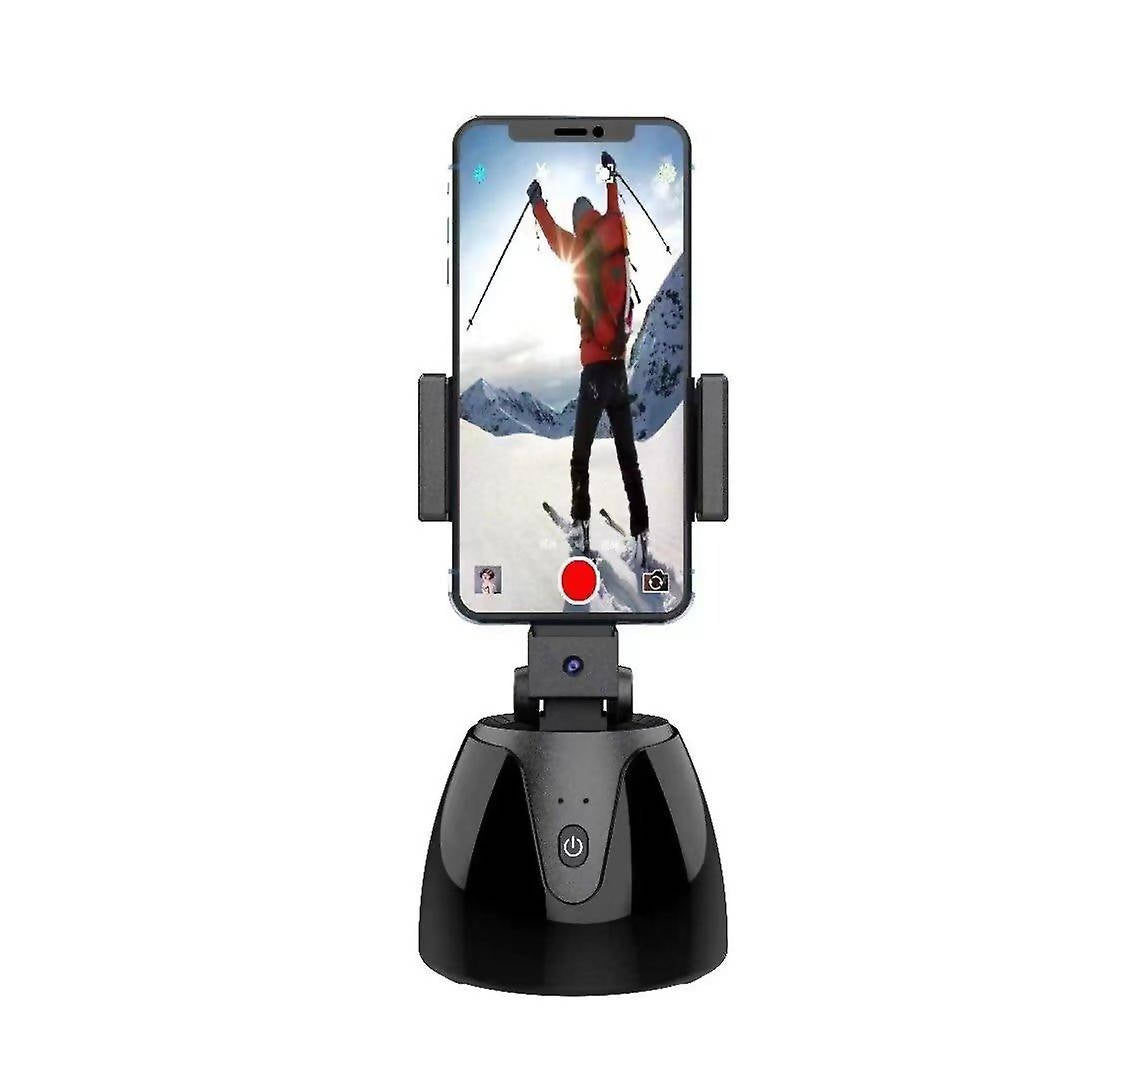 Smart Shooting Selfie 360 Rotation Tripod All-in-one Object Tracking Holder Camera Gimbal for Photo Vlog Live Video Record